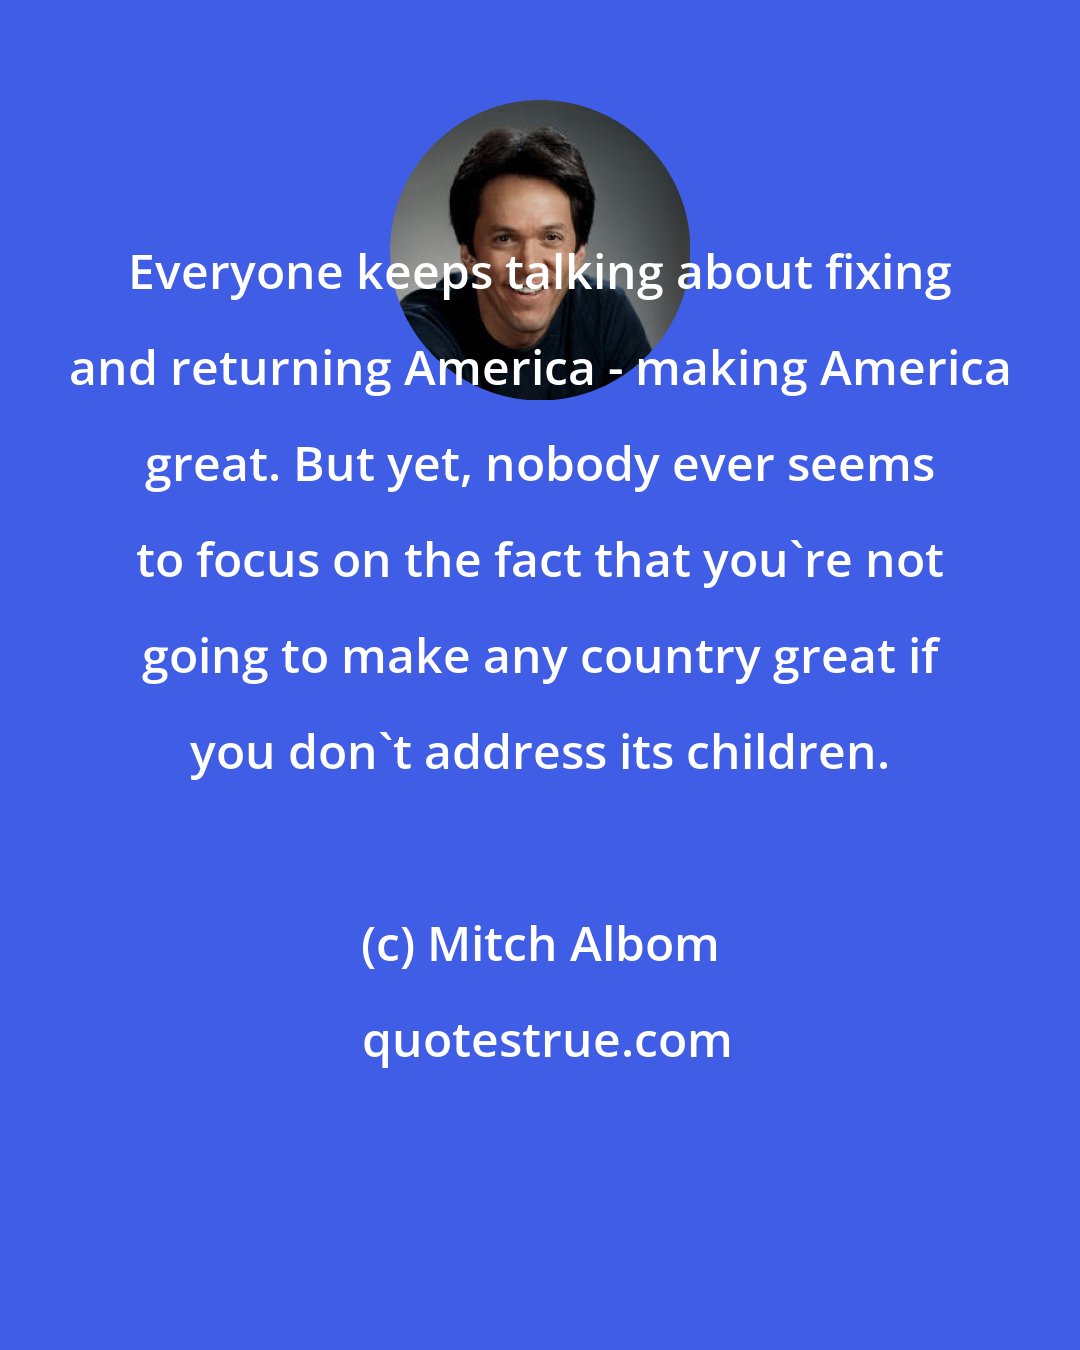 Mitch Albom: Everyone keeps talking about fixing and returning America - making America great. But yet, nobody ever seems to focus on the fact that you're not going to make any country great if you don't address its children.